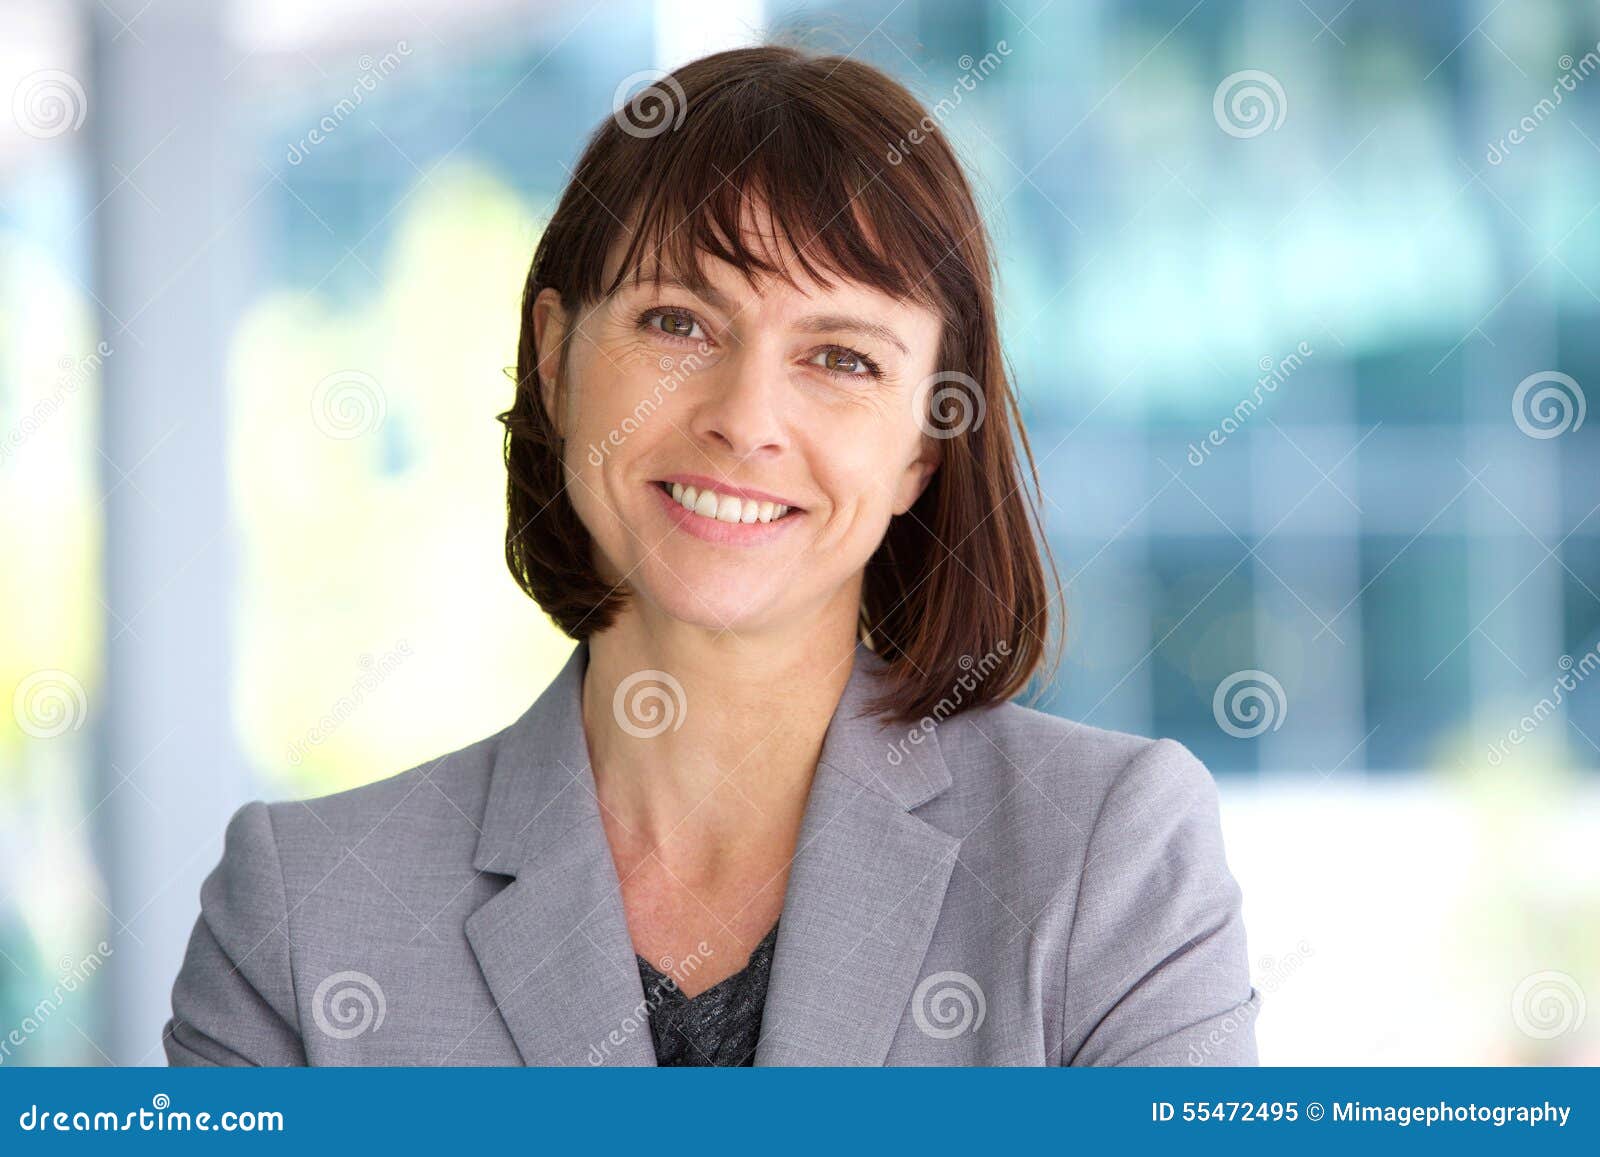 professional business woman smiling outdoor